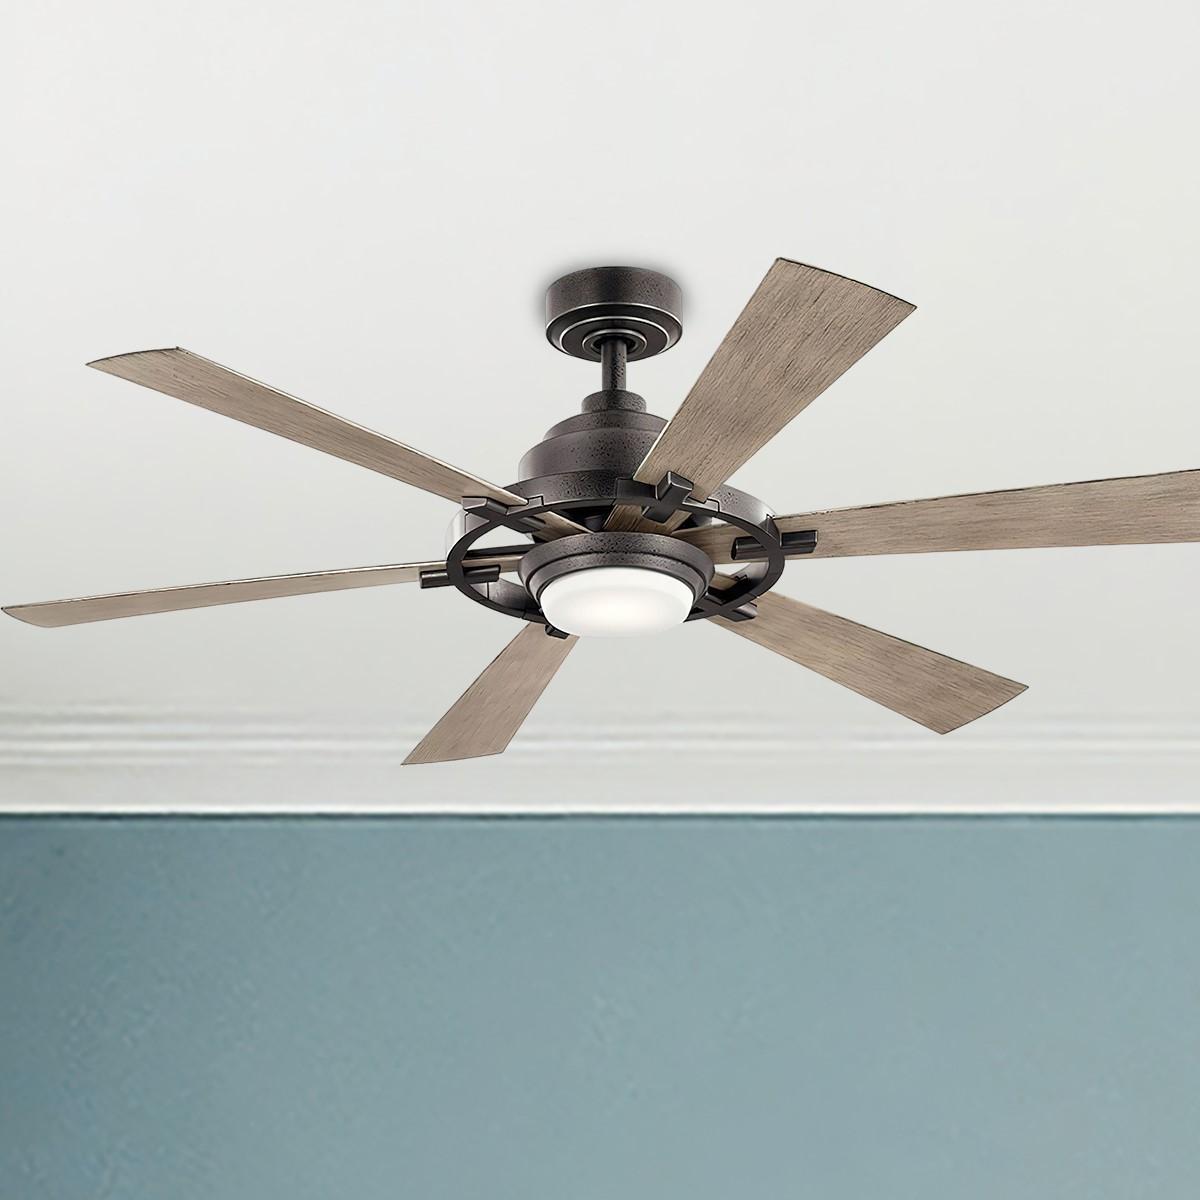 Kichler Iras 52 Inch Farmhouse Indoor Outdoor Ceiling Fan With Light And Remote Bees Lighting